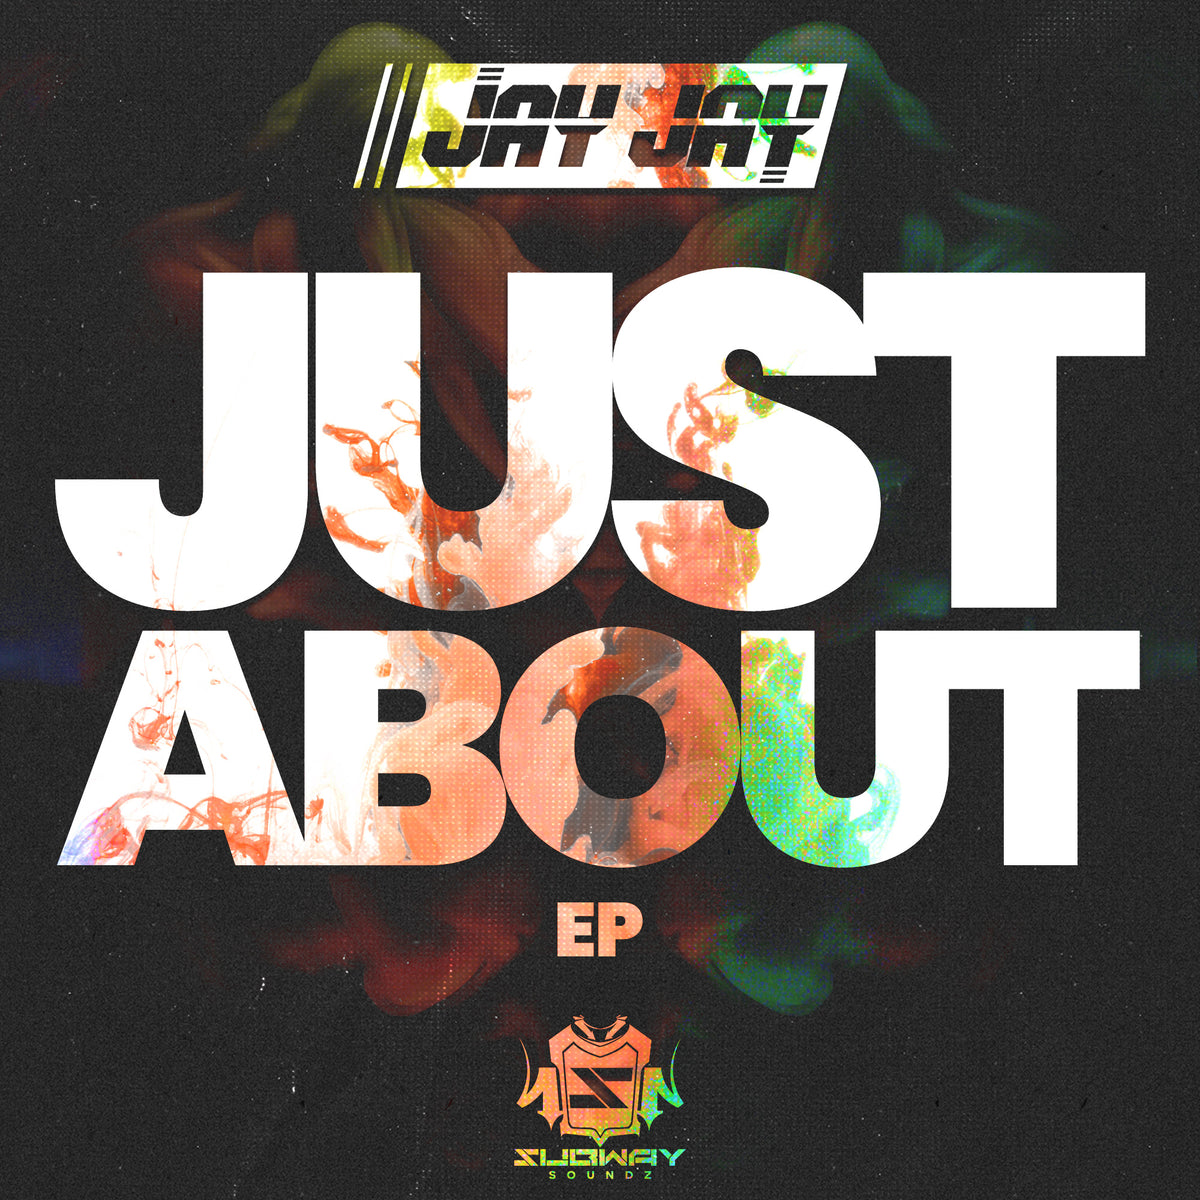 SSLD 163 - Jay Jay 'Just About EP'